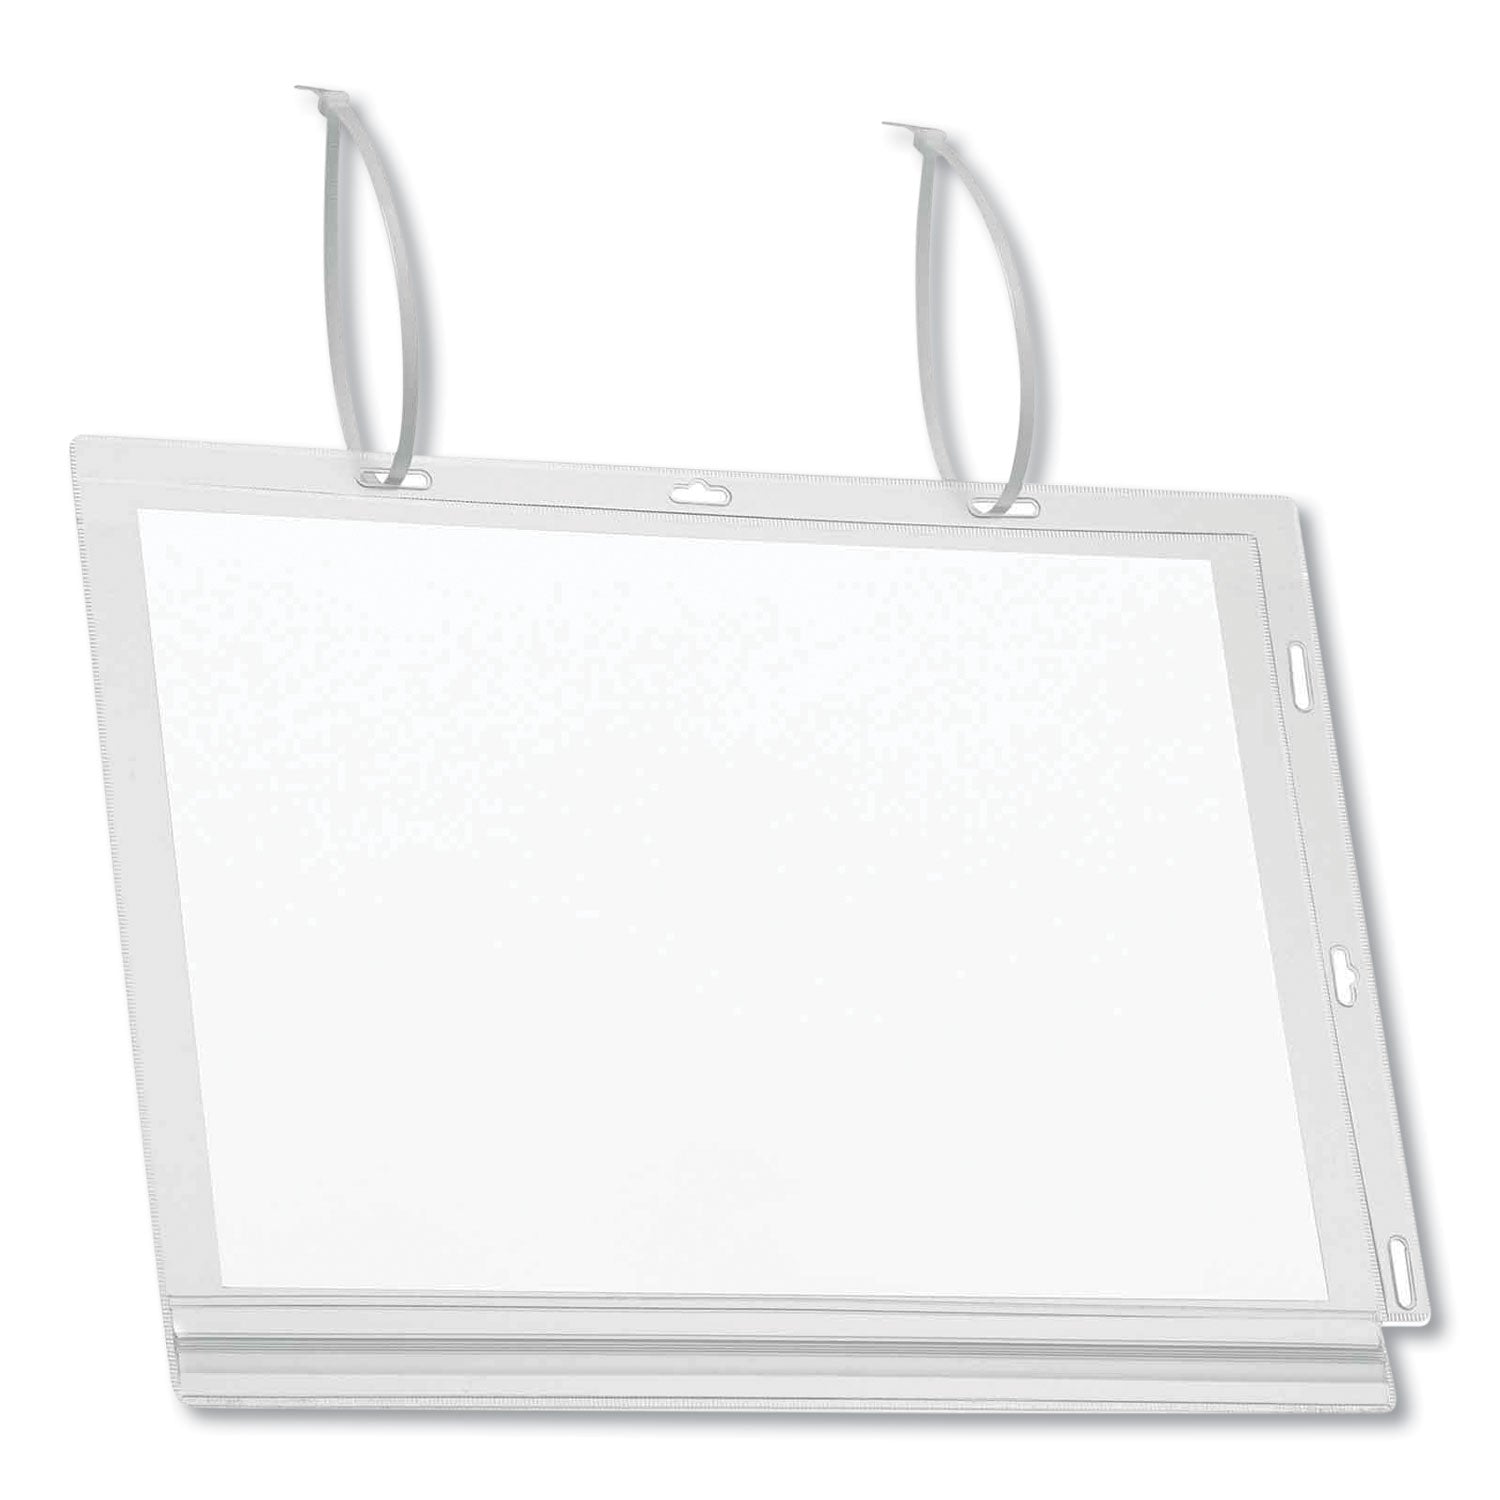 water-resistant-sign-holder-pockets-with-cable-ties-85-x-11-clear-frame-5-pack_dbl502719 - 1